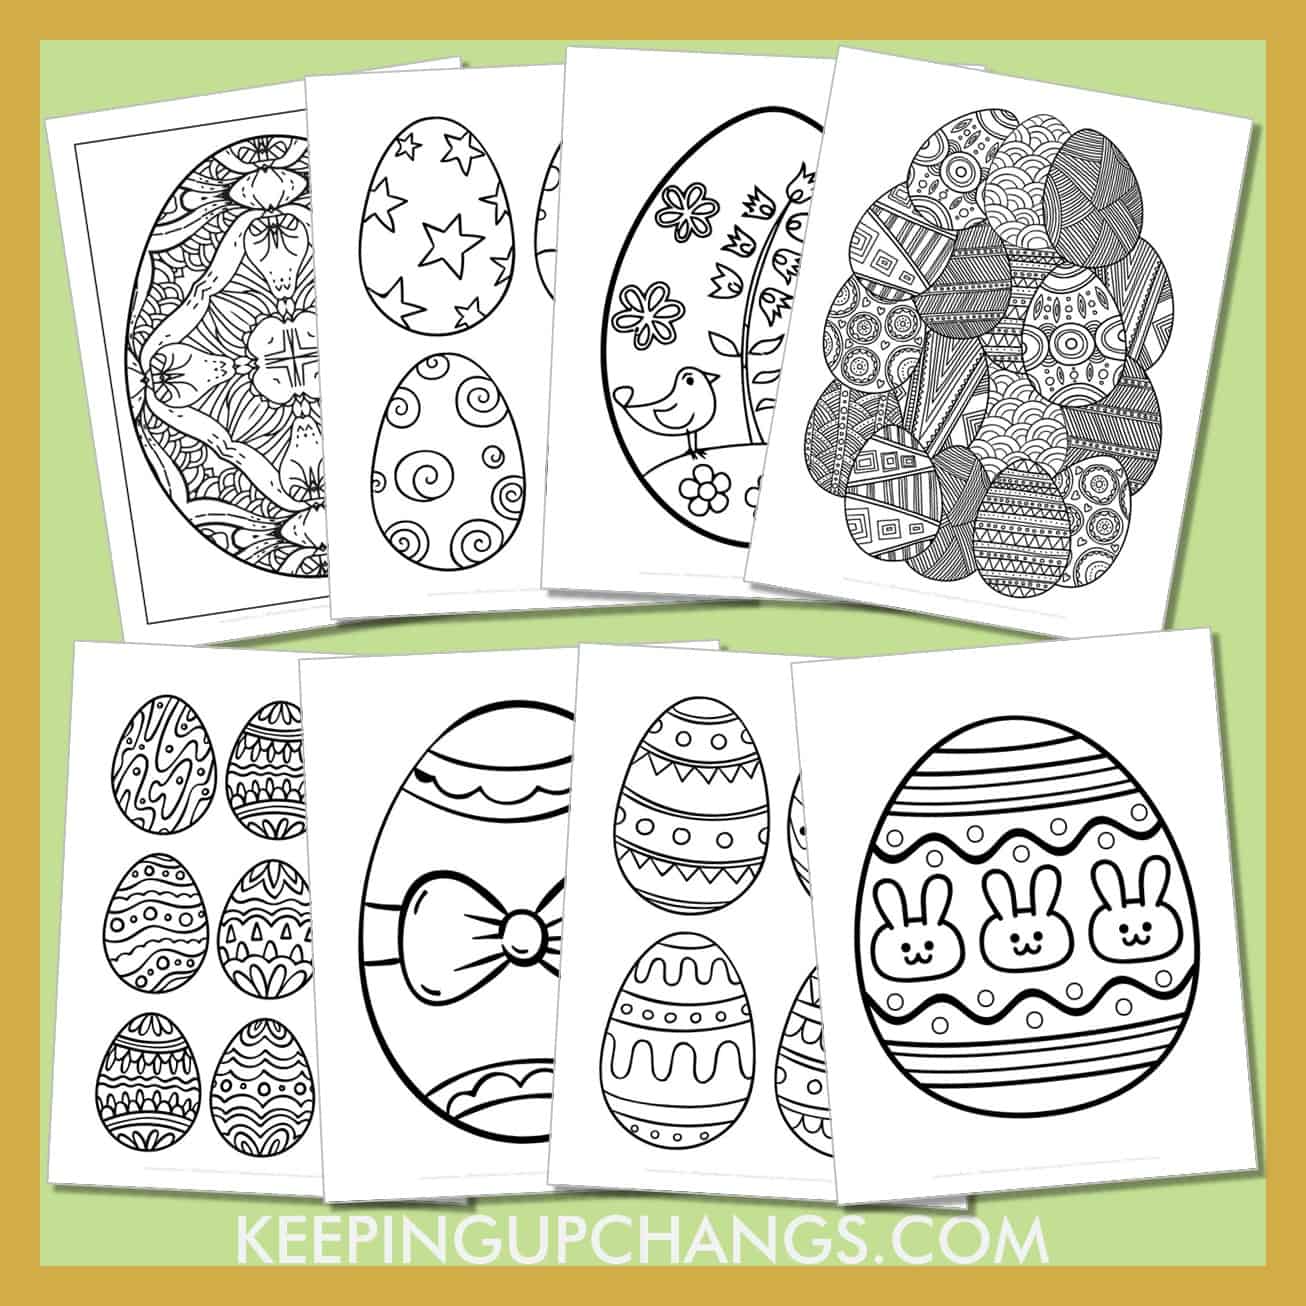 free easter egg pictures to color for toddlers, kids, adults.